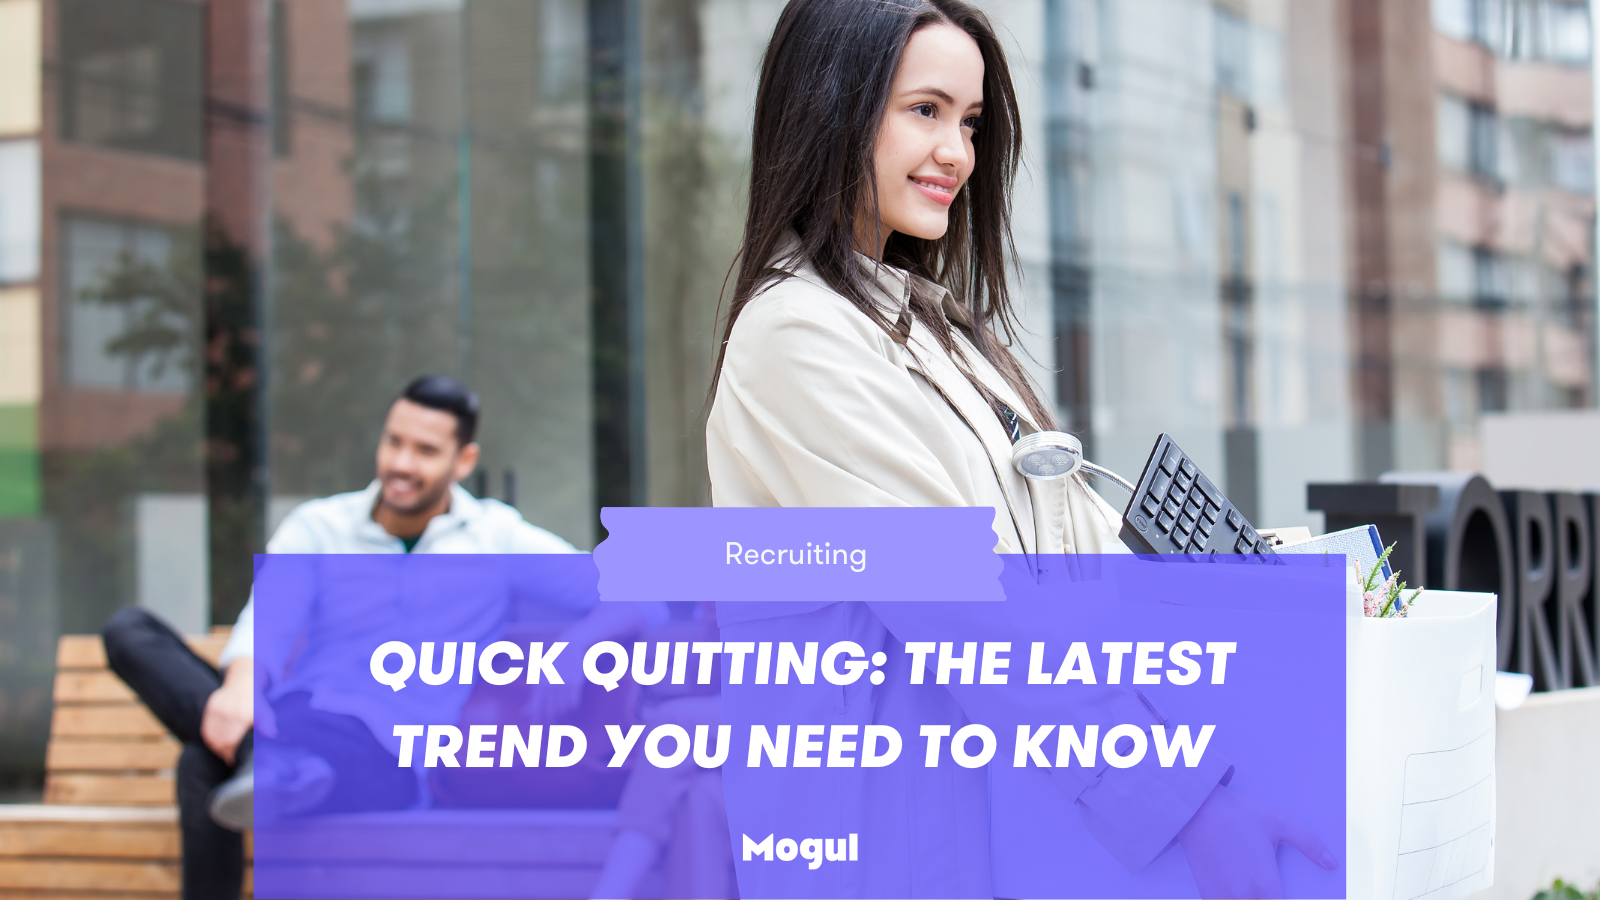 Quick Quitting: The Latest Trend You Need to Know